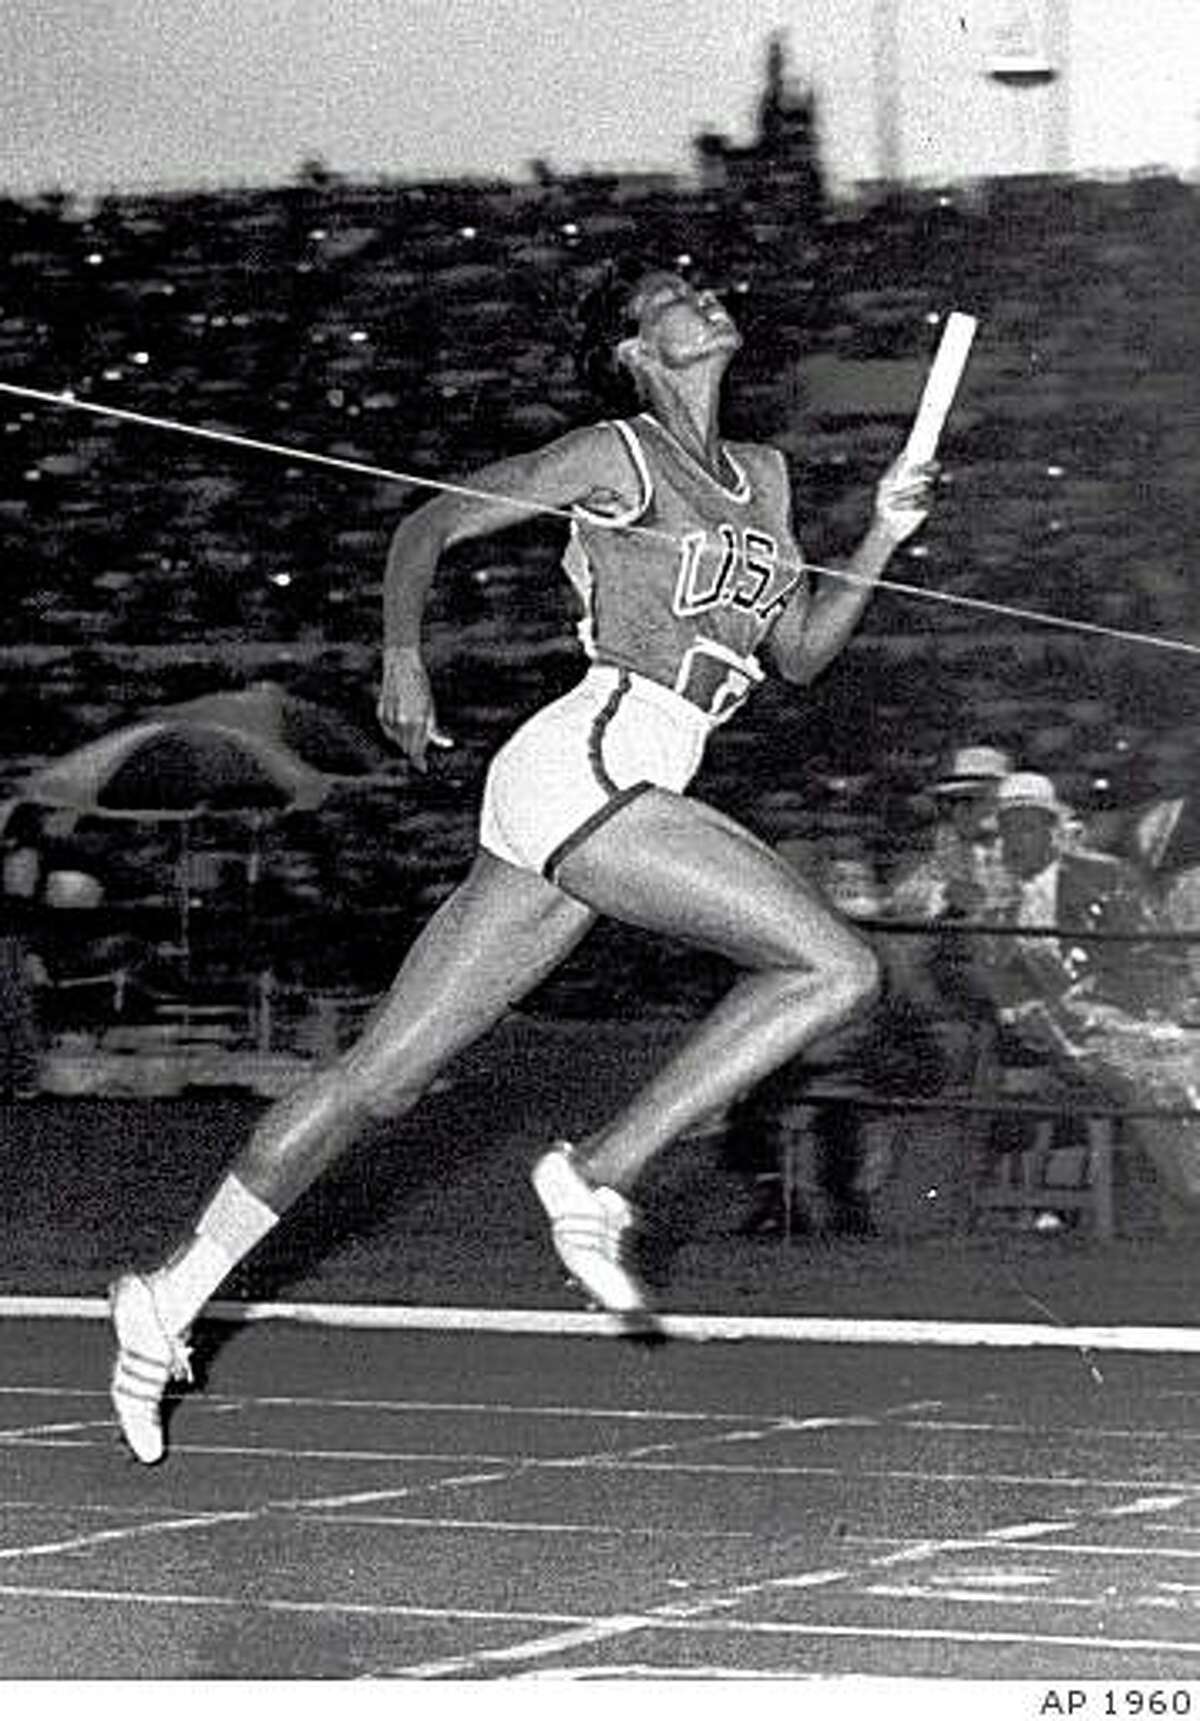 ADVANCE FOR WEEKEND JUNE 22-23--FILE--Wilma Rudolph, 20, hits the tape to win the 400 meter relay for the US at the 1960 Summer Olympics in Rome. (AP Photo/file)